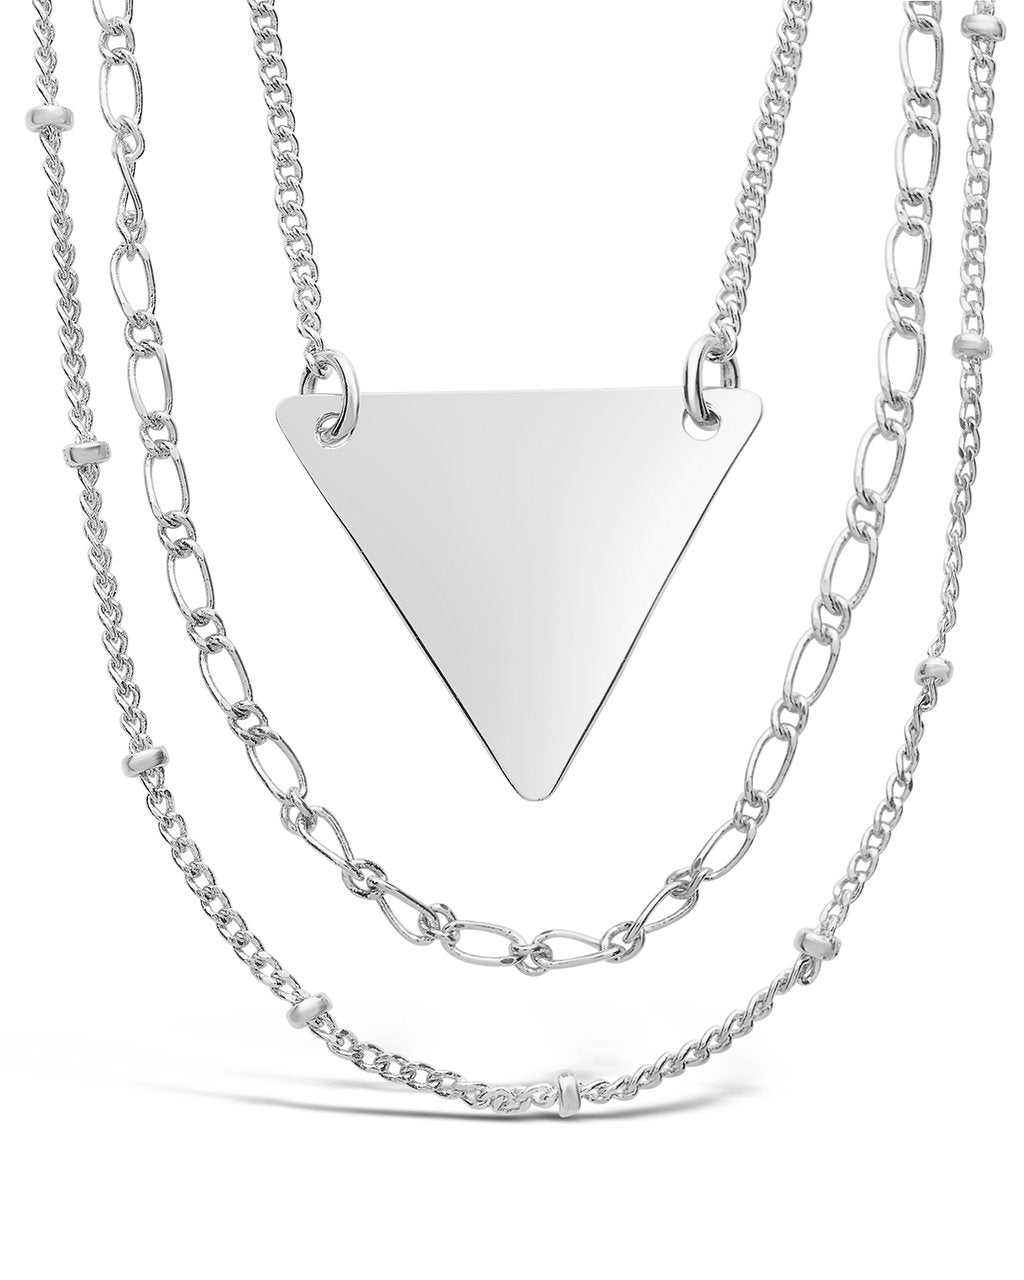 Triple Chain Layered Triangle Necklace